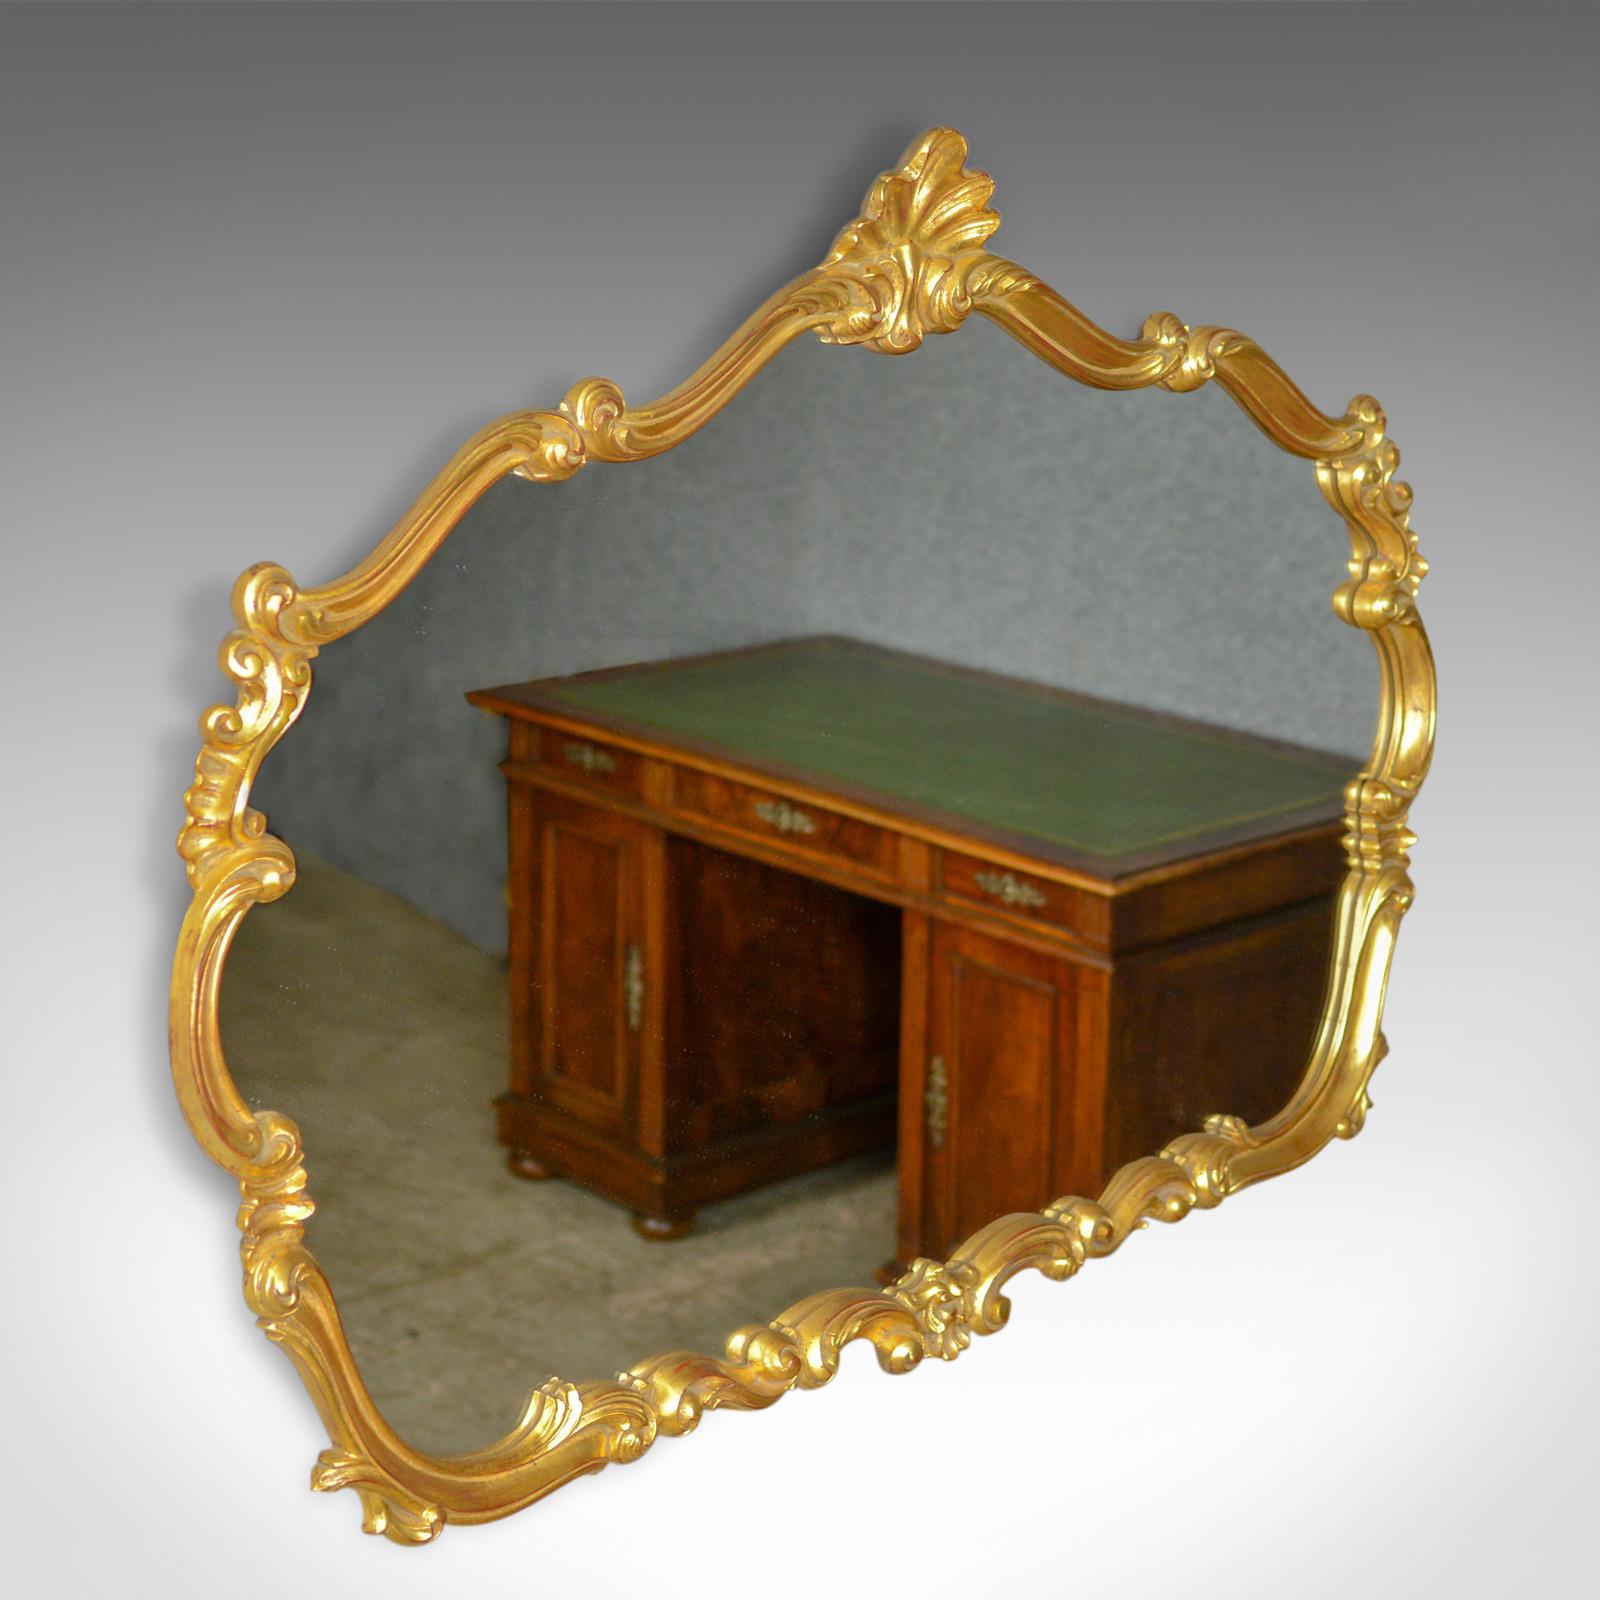 This is a large, vintage wall mirror in the Victorian Rococo Revival manner, English dating to the latter part of the 20th century.

Typically elaborate and elegant design
Gilt frame featuring scrolls, leaves and embellishment
Quality shaped